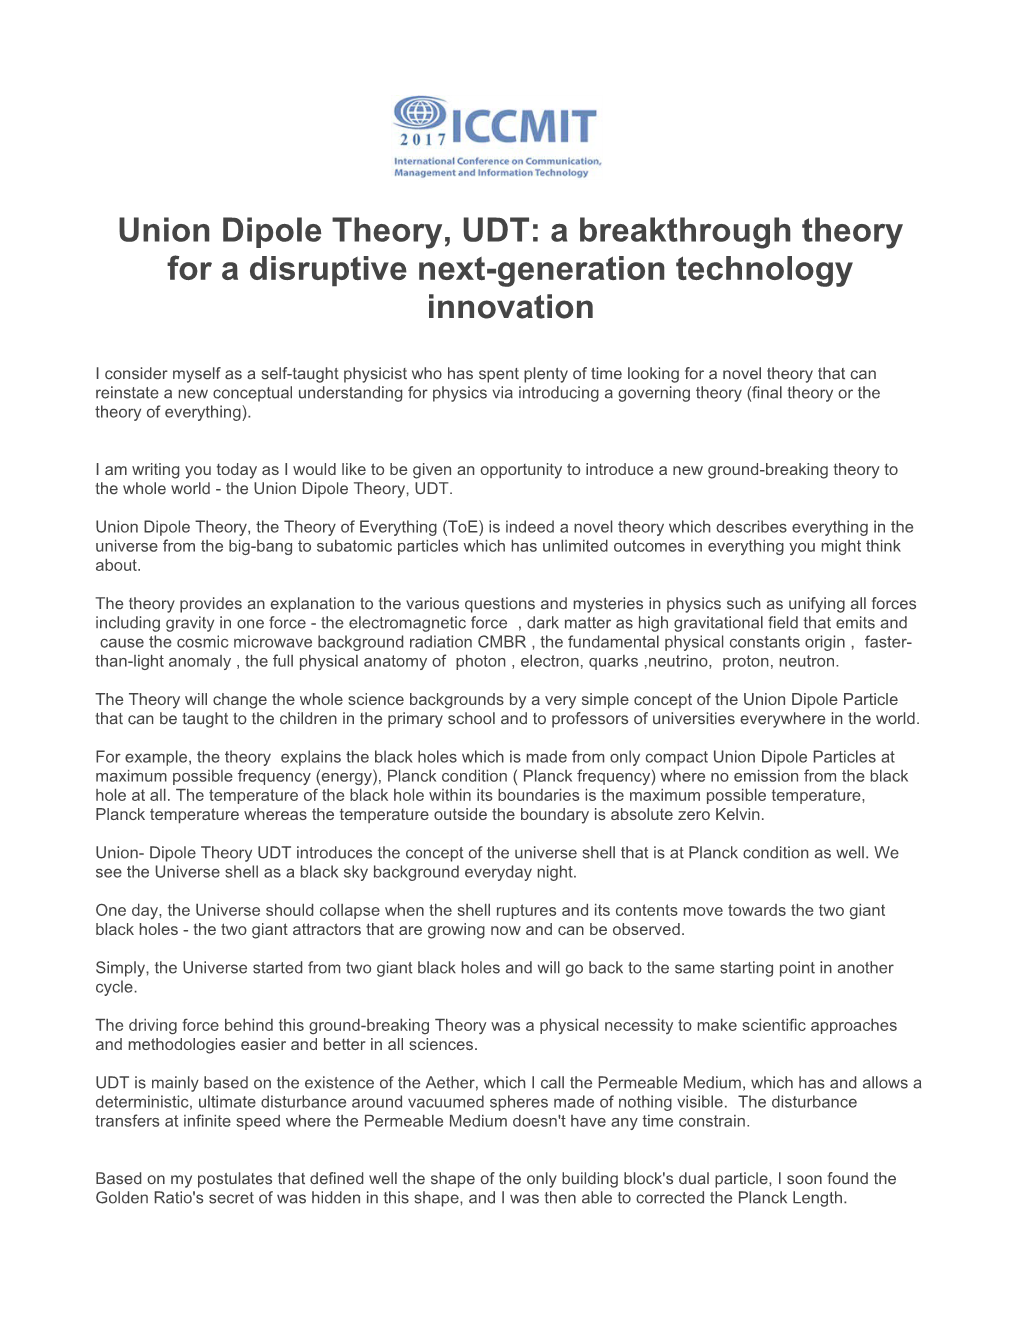 Union Dipole Theory, UDT: a Breakthrough Theory for a Disruptive Next-Generation Technology